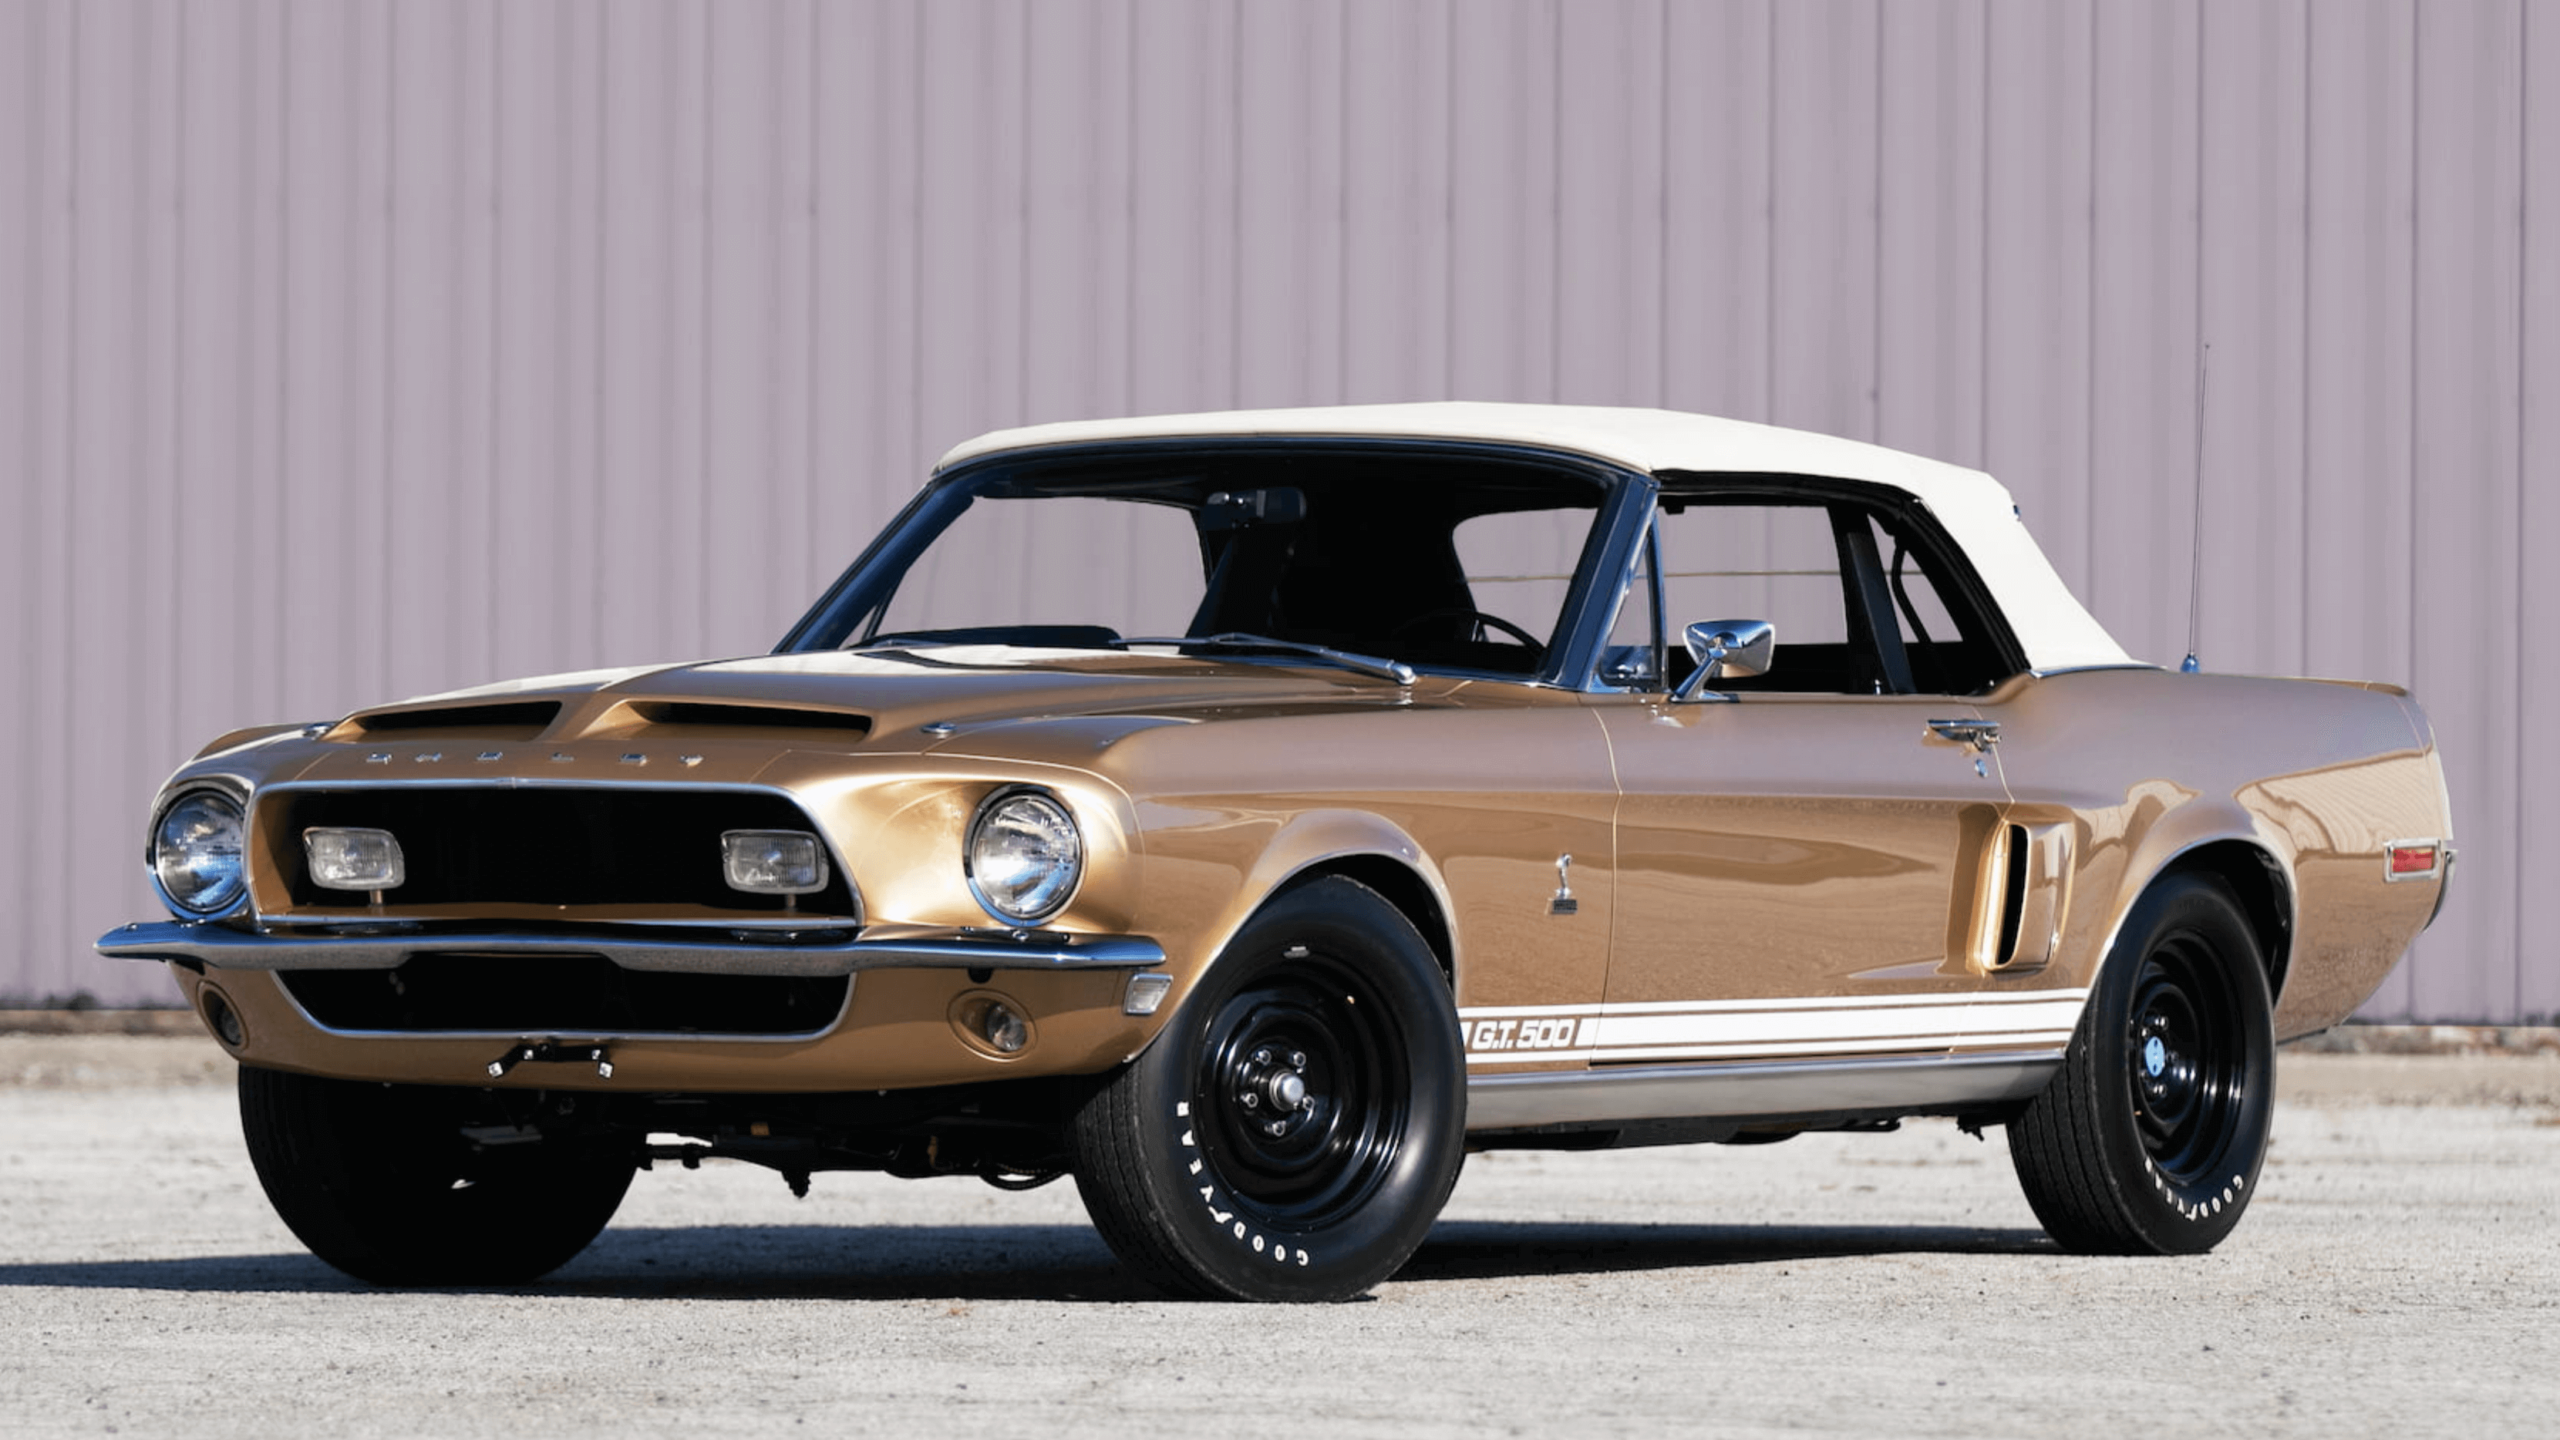 Mustang sold at Mecum Shelby GT500